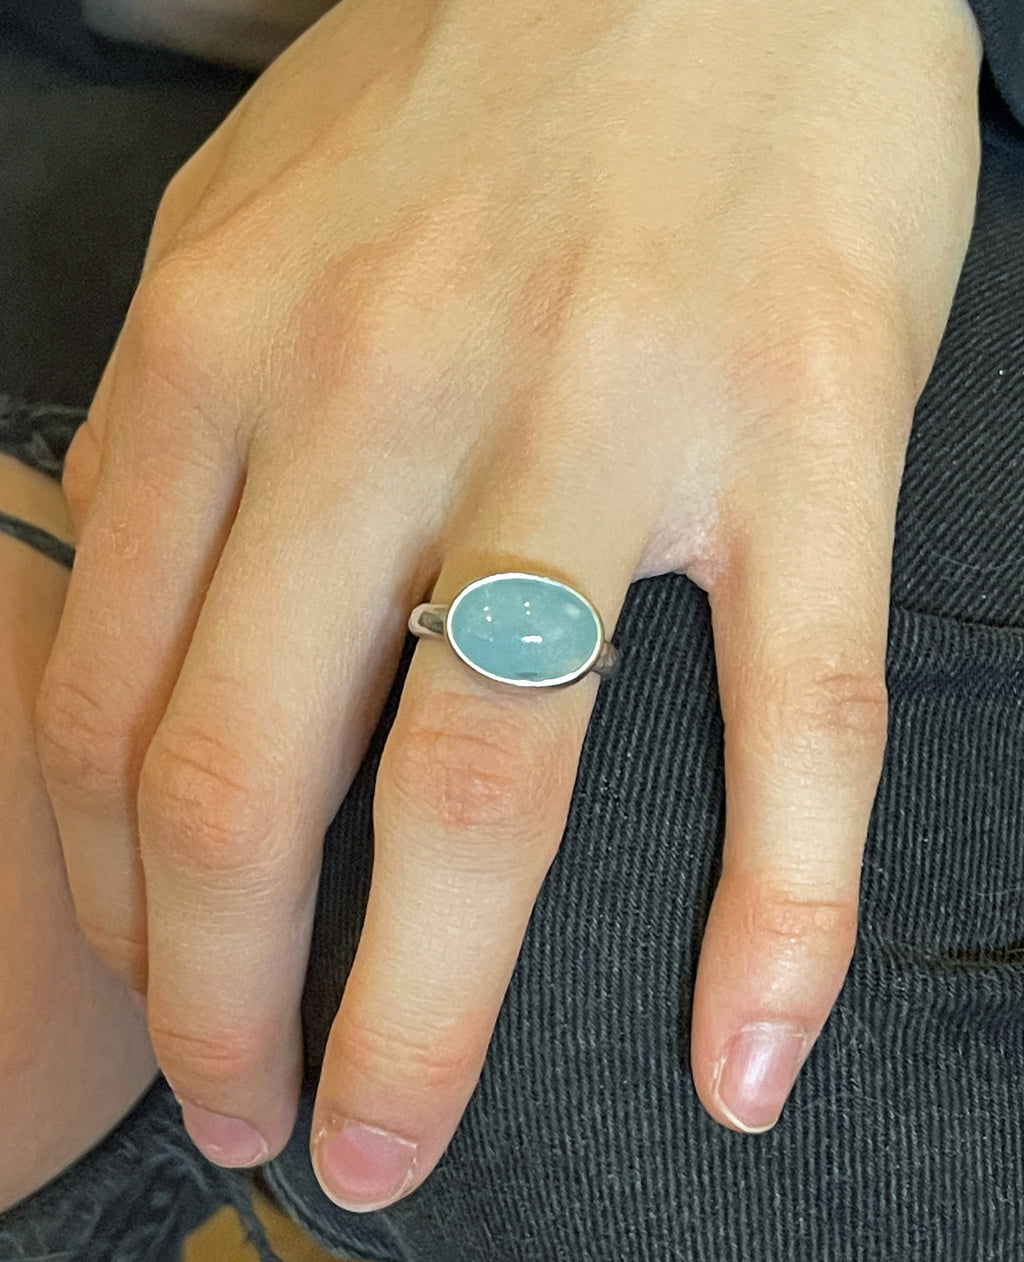 Aquamarine Ring in Sterling Silver, East West Oval Aquamarine Gemstone Ring, Natural Aquamarine Stacking Ring, March Birthday